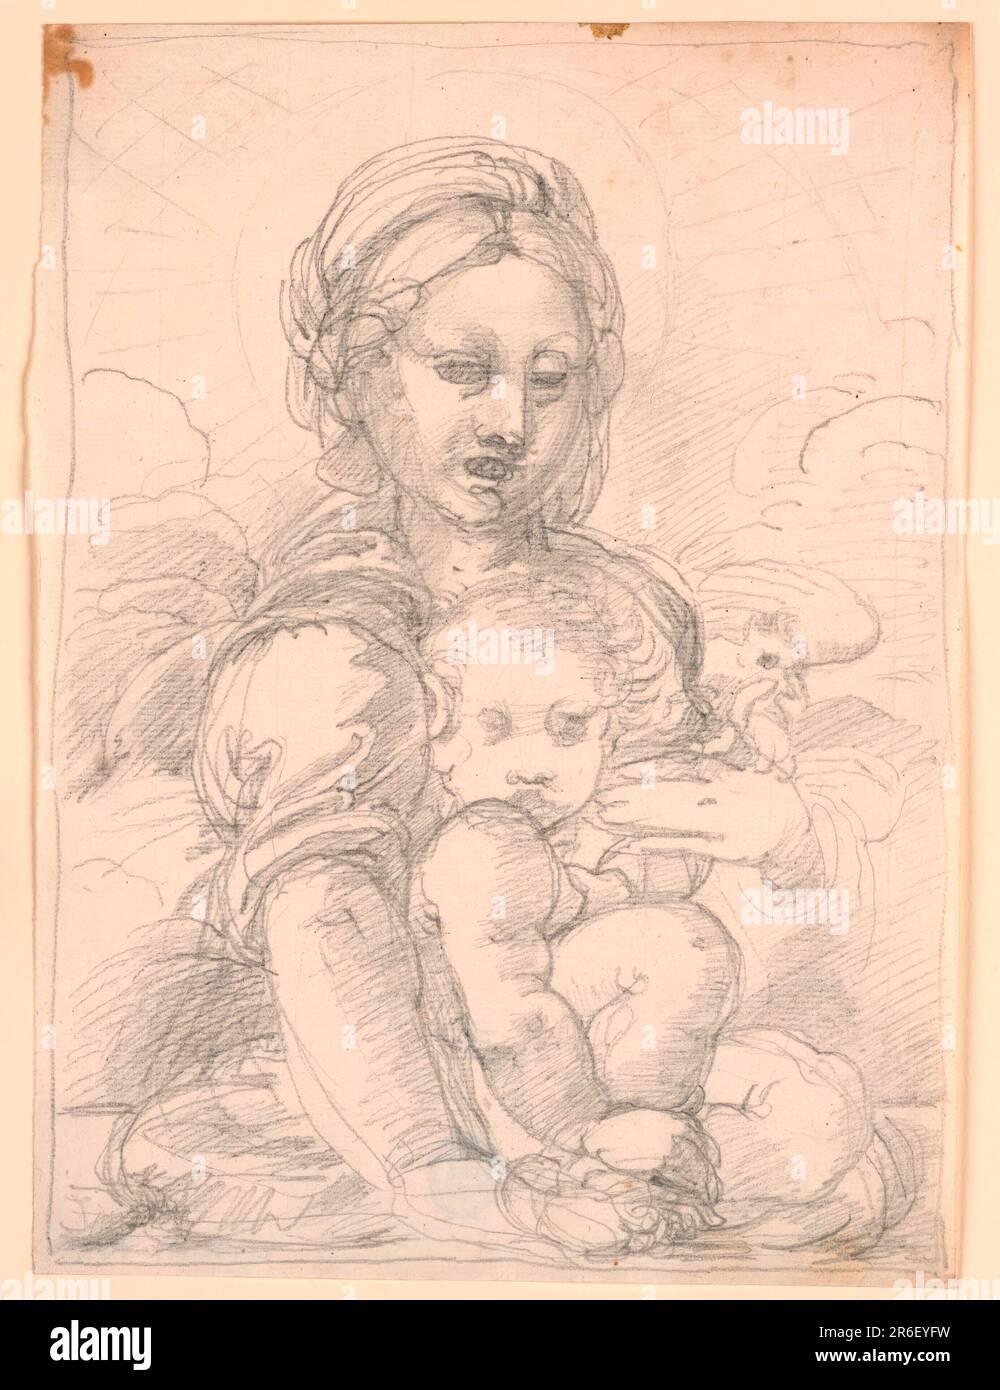 The Child sits upon a cushion, lifting his right left and holding his right ankle with his right hand. The right shoulder covers part of the chin. Mary, standing behind him, holding his left arm with her left hand. A bird in his left hand. Part of the sky visible, clouds, the sun. Framing line. Graphite on paper. Date: 1820-1850. Museum: Cooper Hewitt, Smithsonian Design Museum. Stock Photo